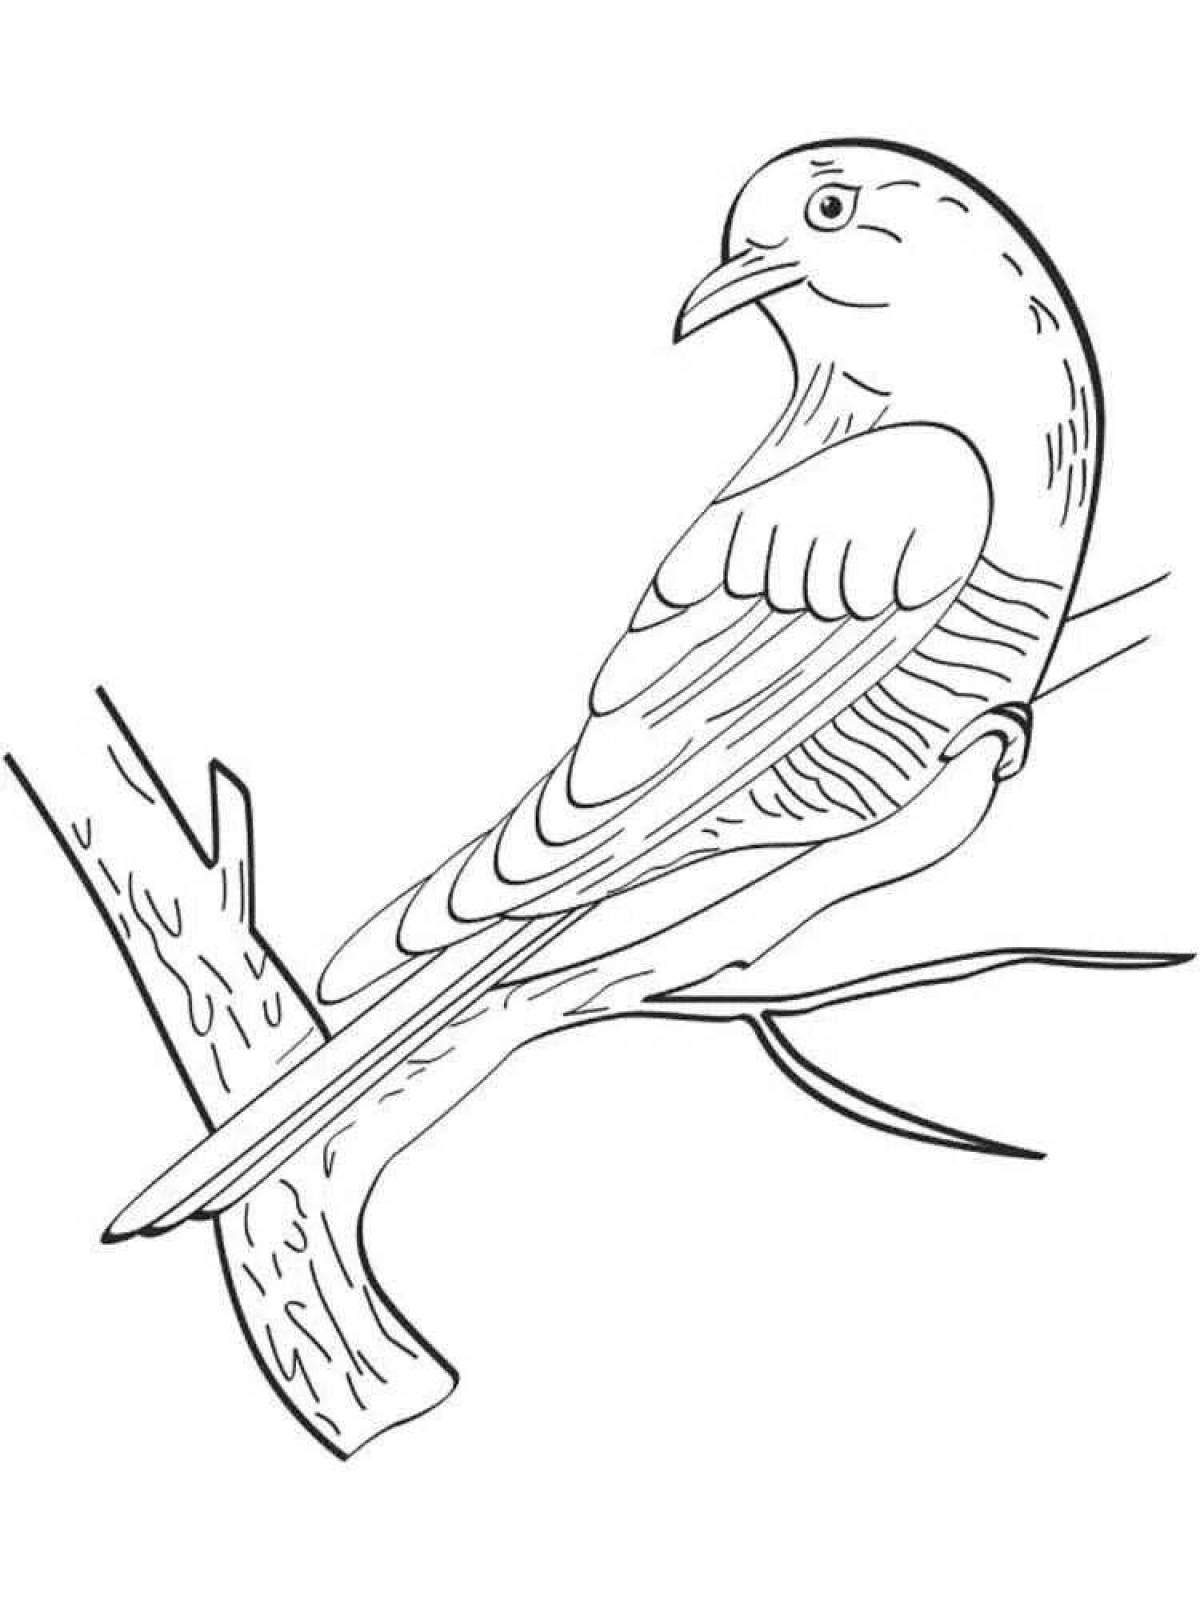 Coloring book with a cuckoo for preschoolers